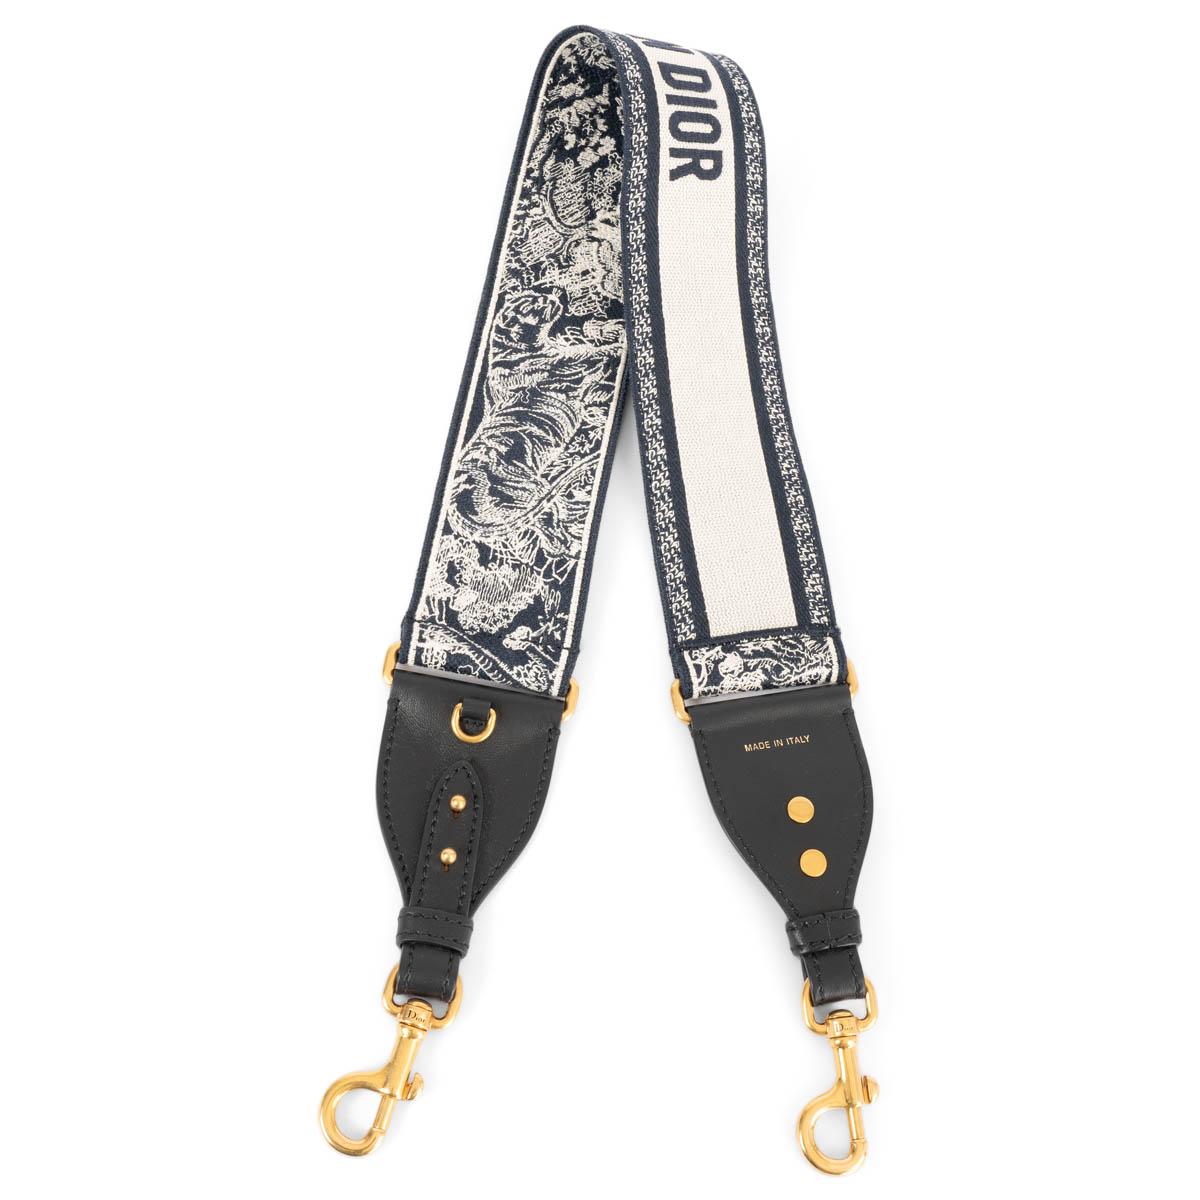 100% authentic Christian Dior shoulder-strap in navy blue Toile de Jouy Sauvage embroidery with black calfskin and gold-tone hardware. the design features on the other side Christian Dior Paris signature. Can be attached to Lady Dior, Saddle, Dior